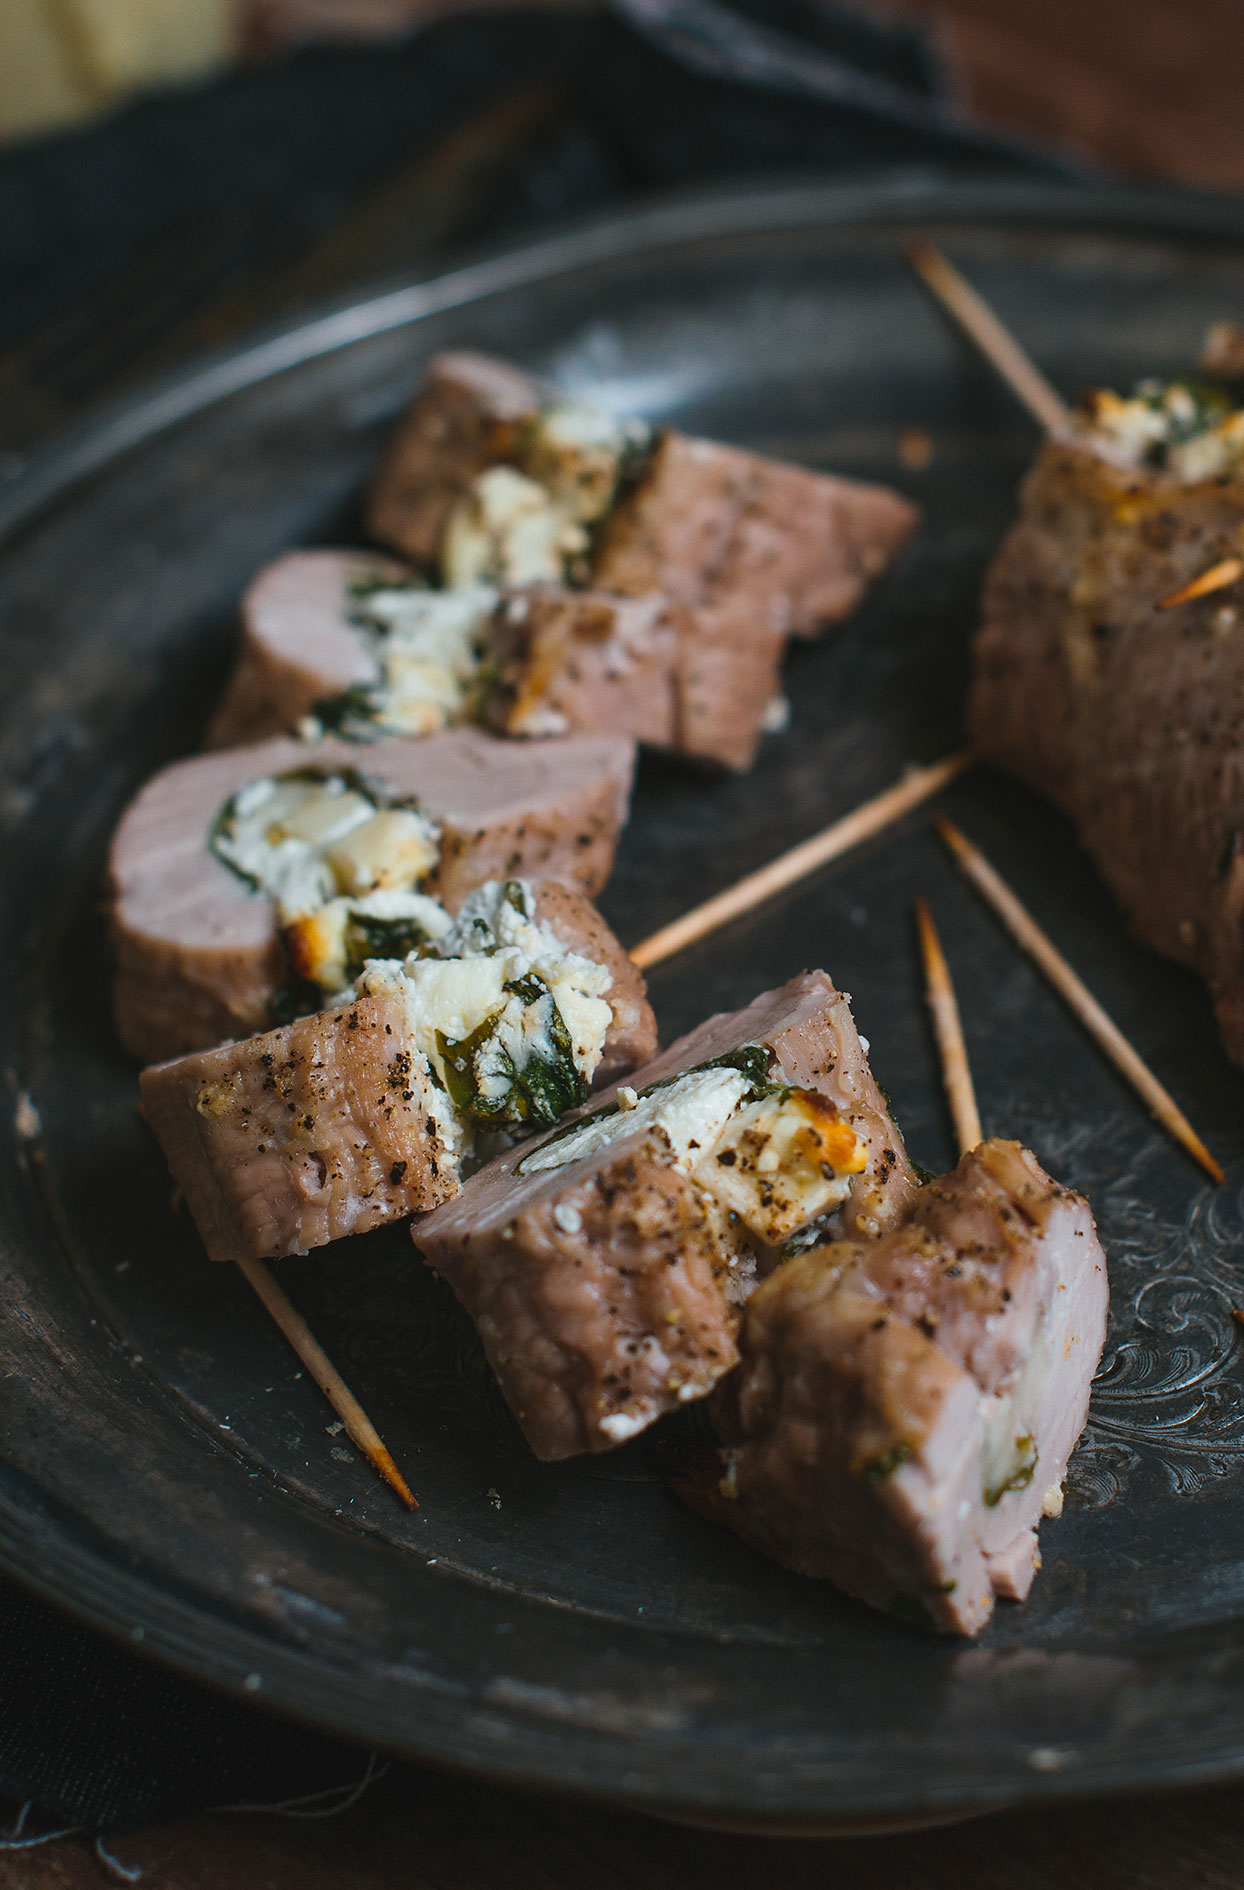 Pork tenderloins stuffed with apples, goat cheese and spinach